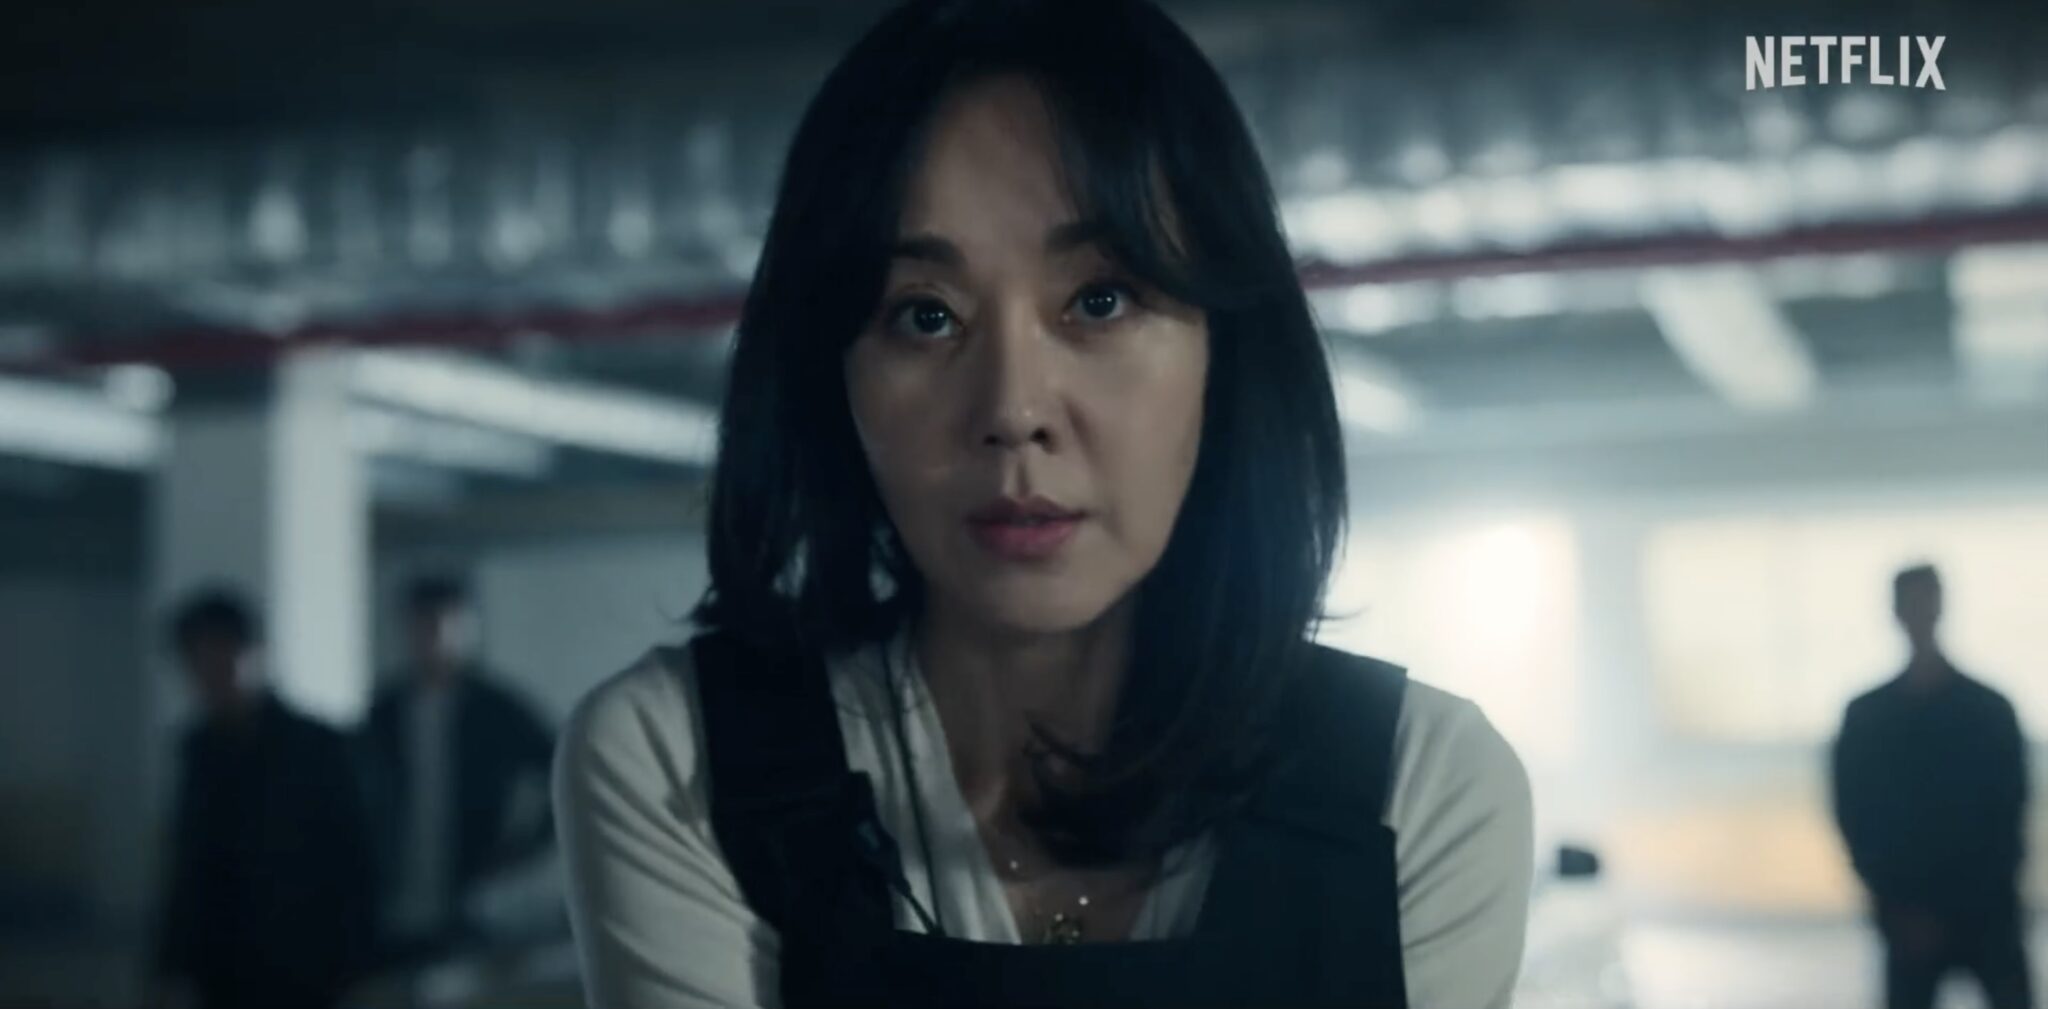 The red robbers are back in Money Heist: Korea - Joint Economic Area Part 2